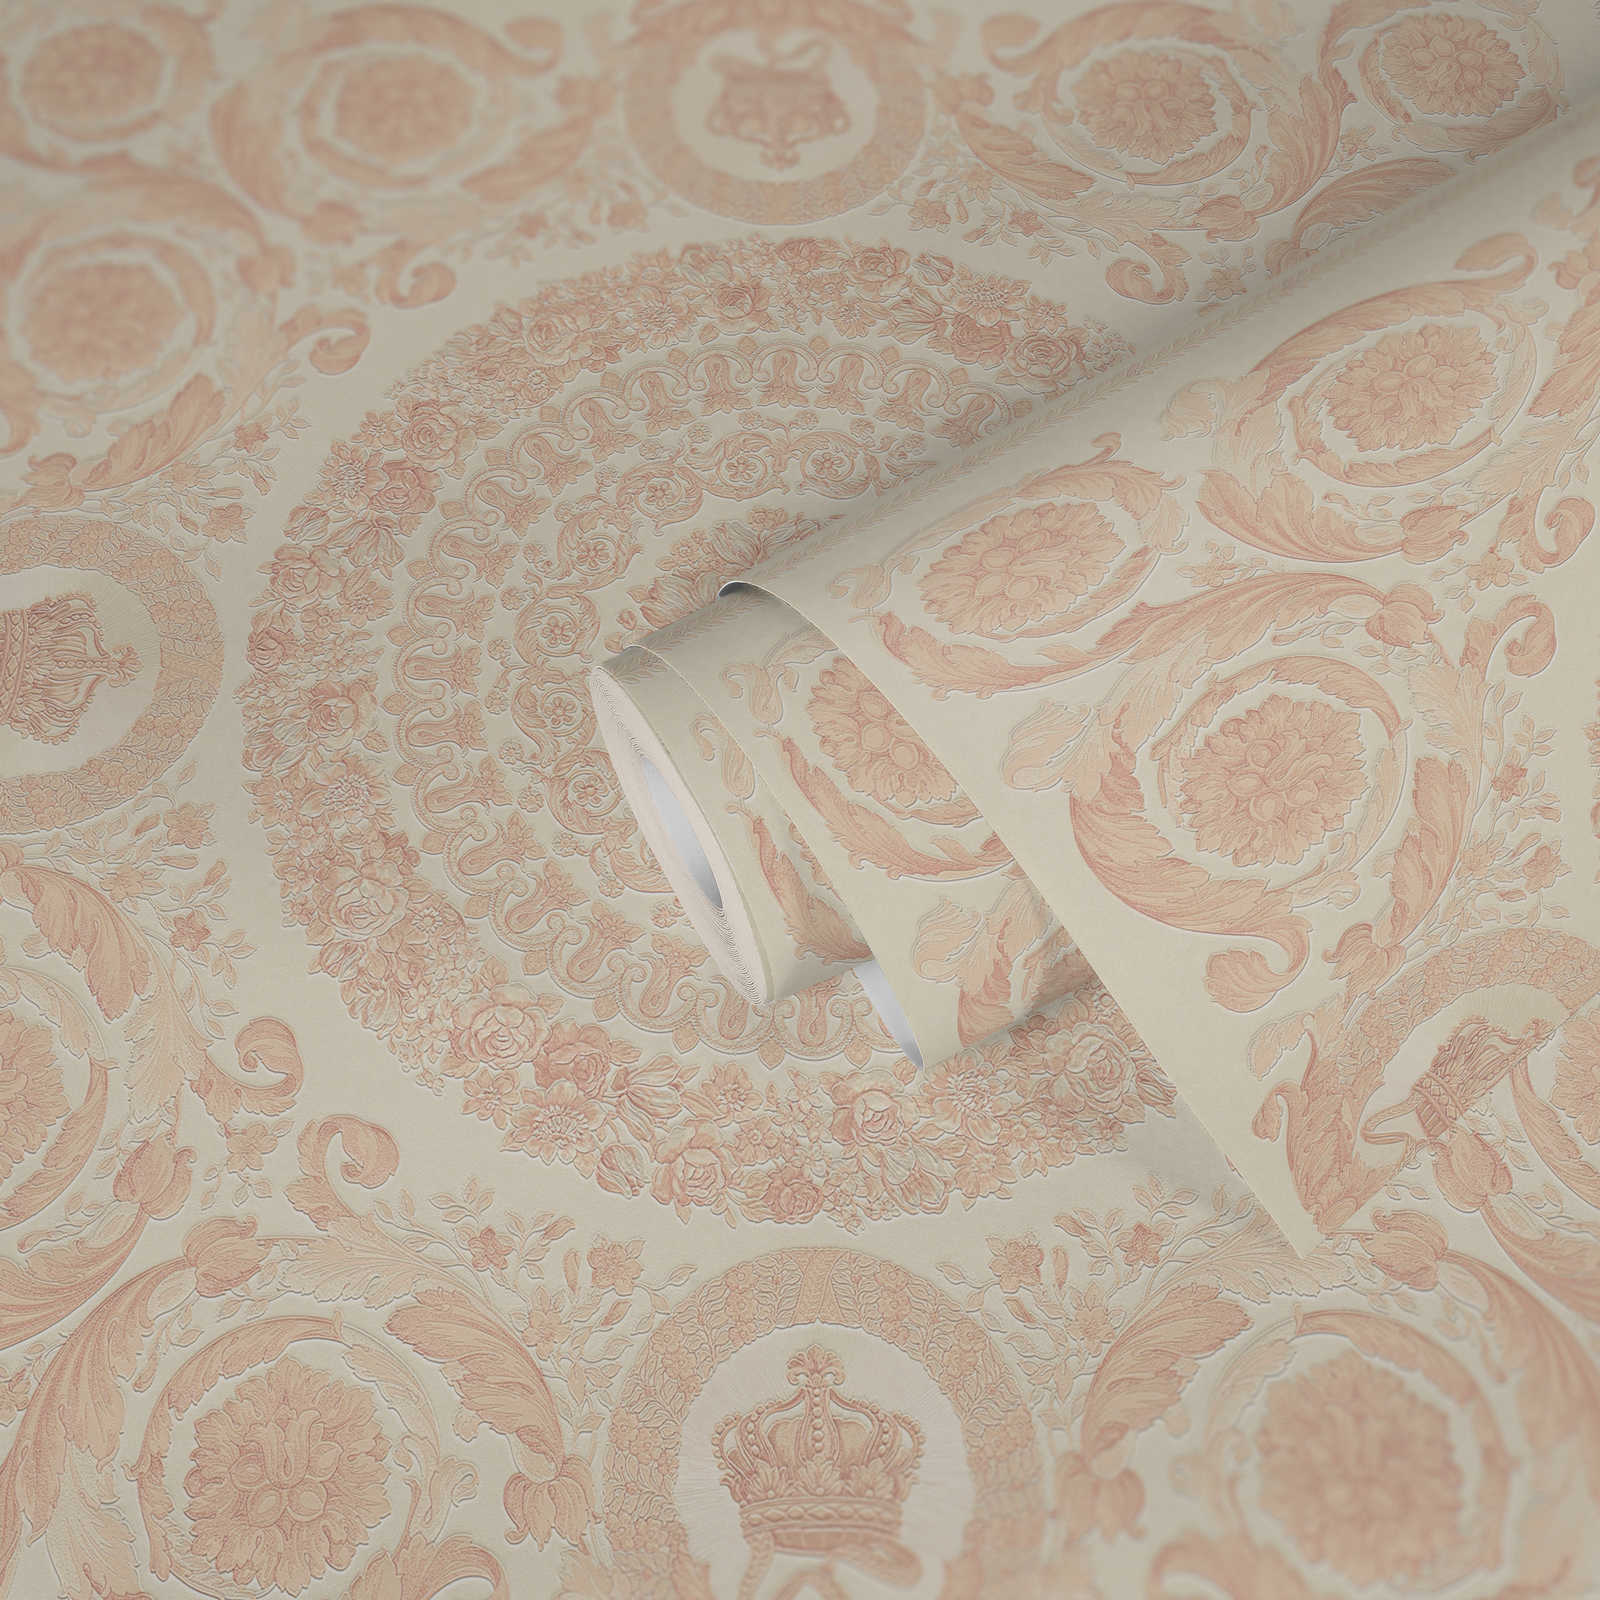             Luxury VERSACE Home wallpaper crowns & roses - pink, white
        